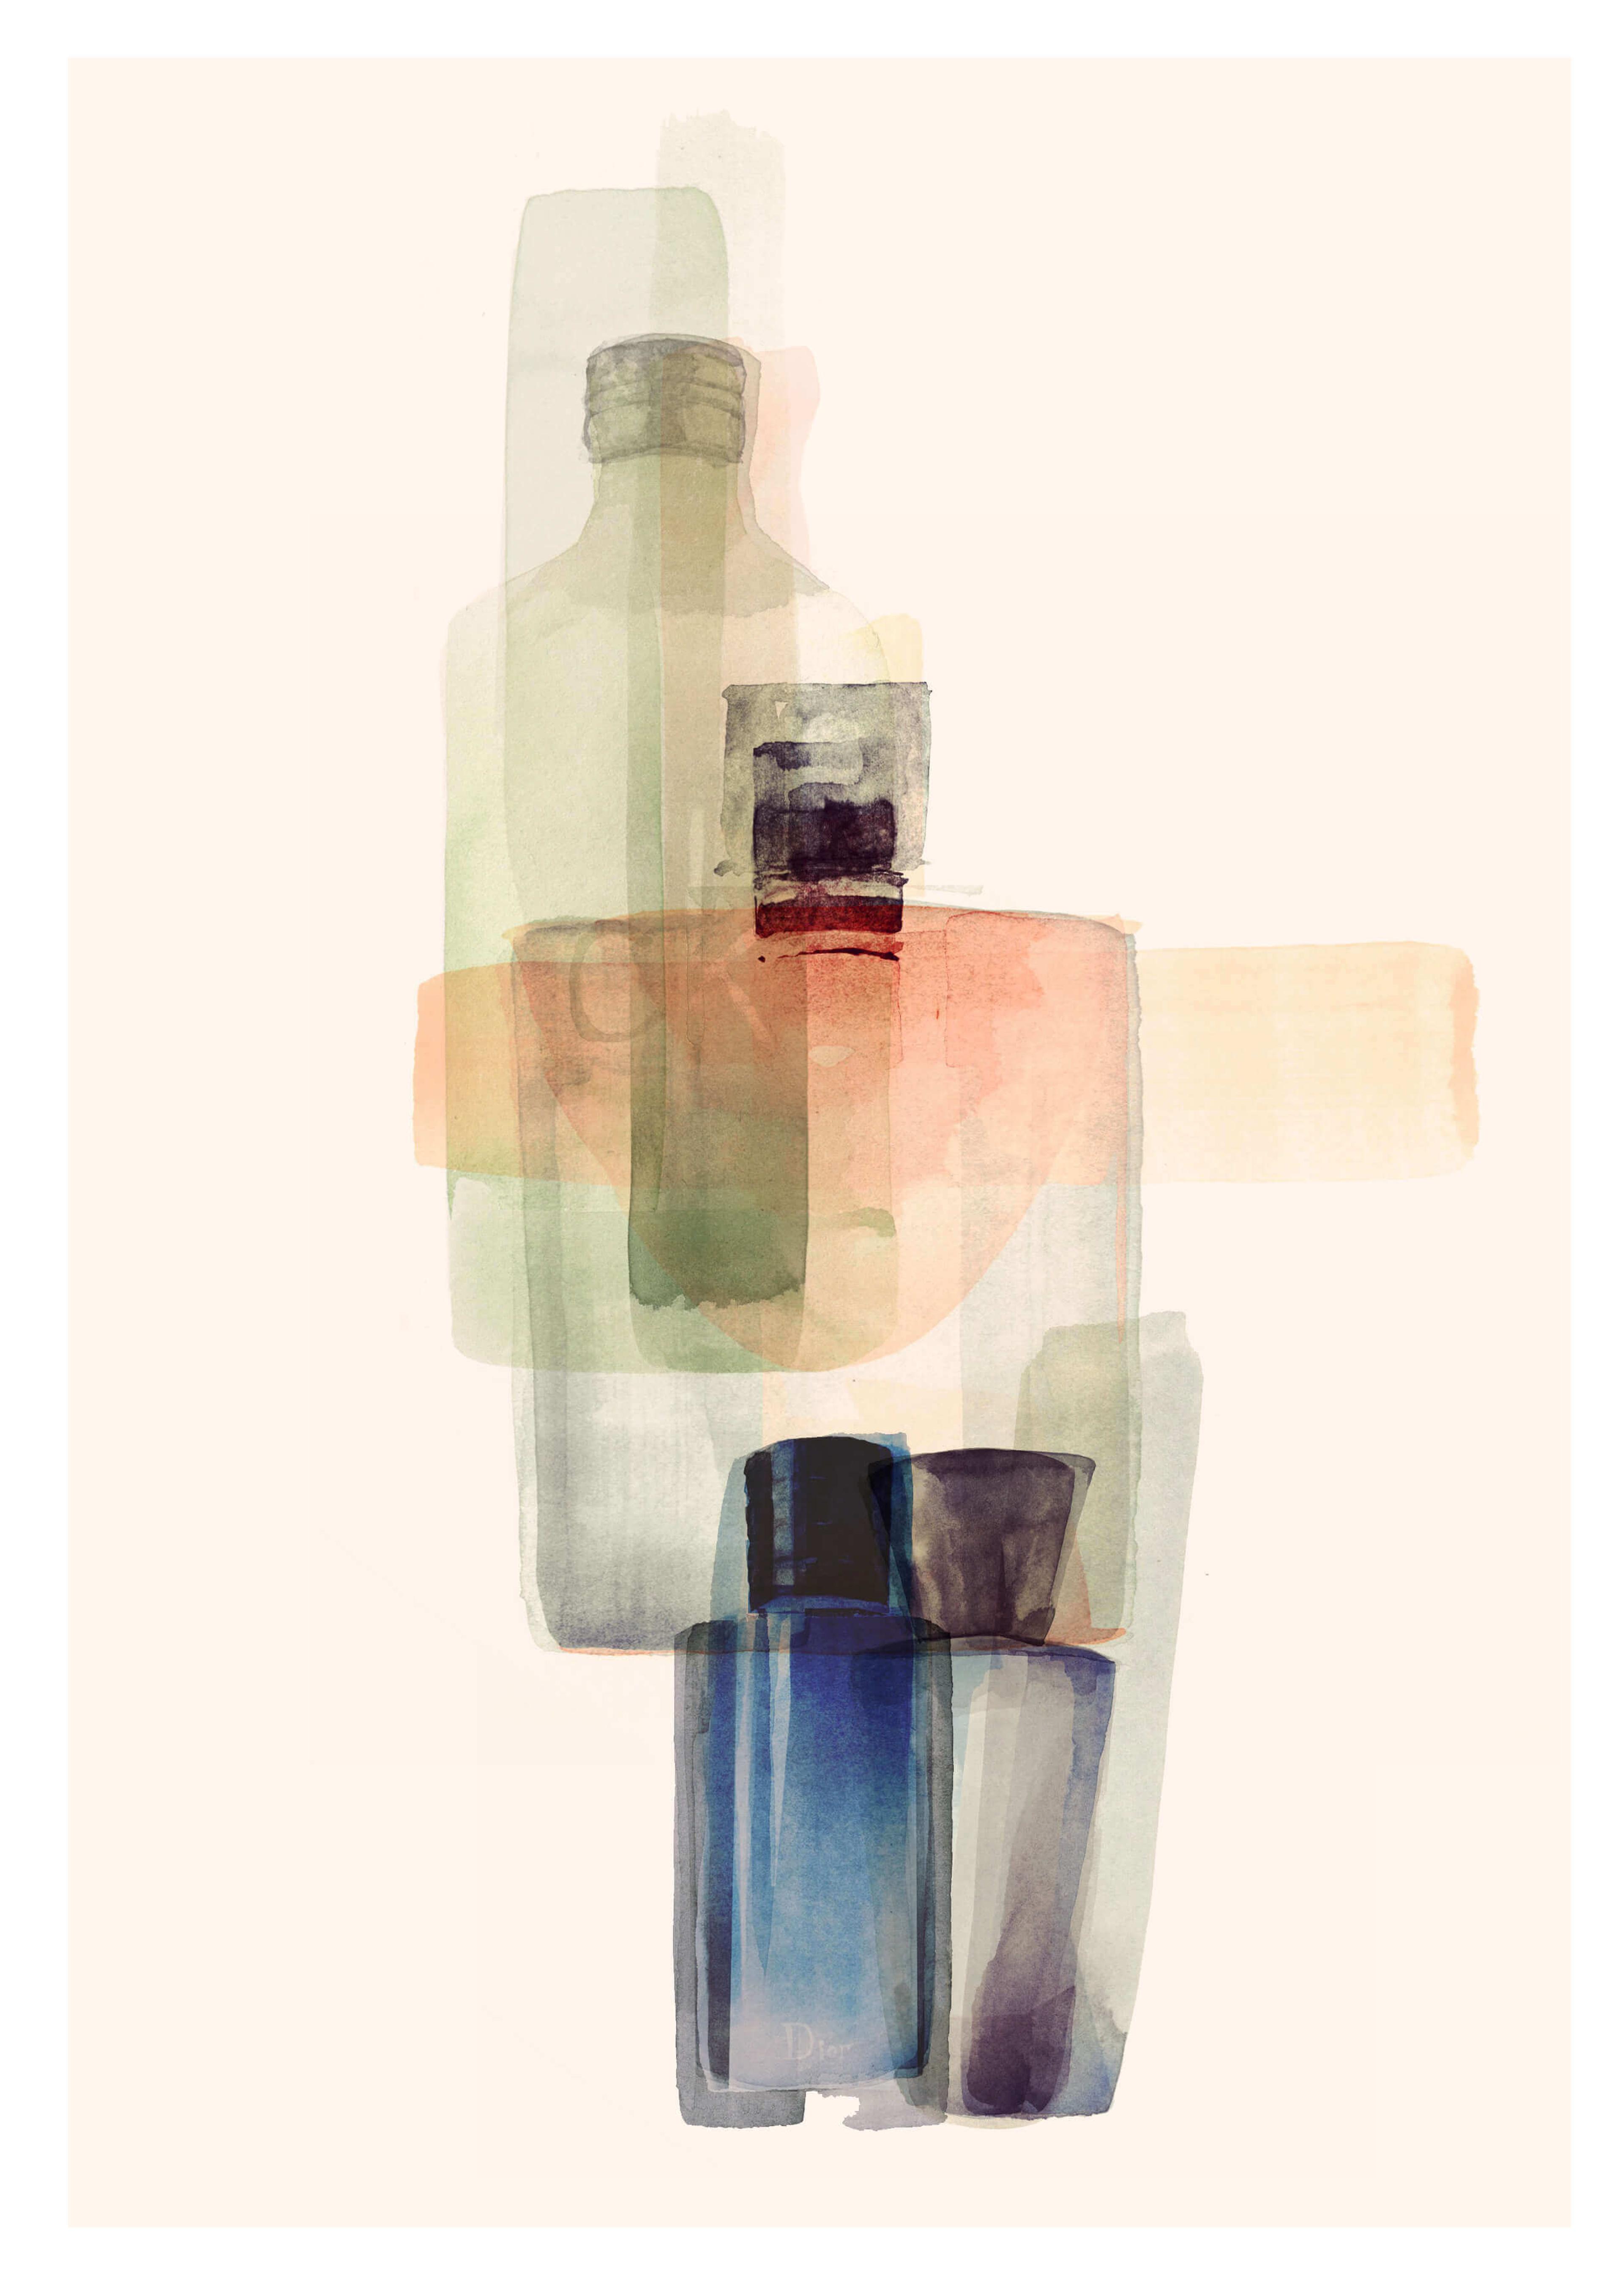 Illustration of glass bottles arranged in a semi-abstract composition